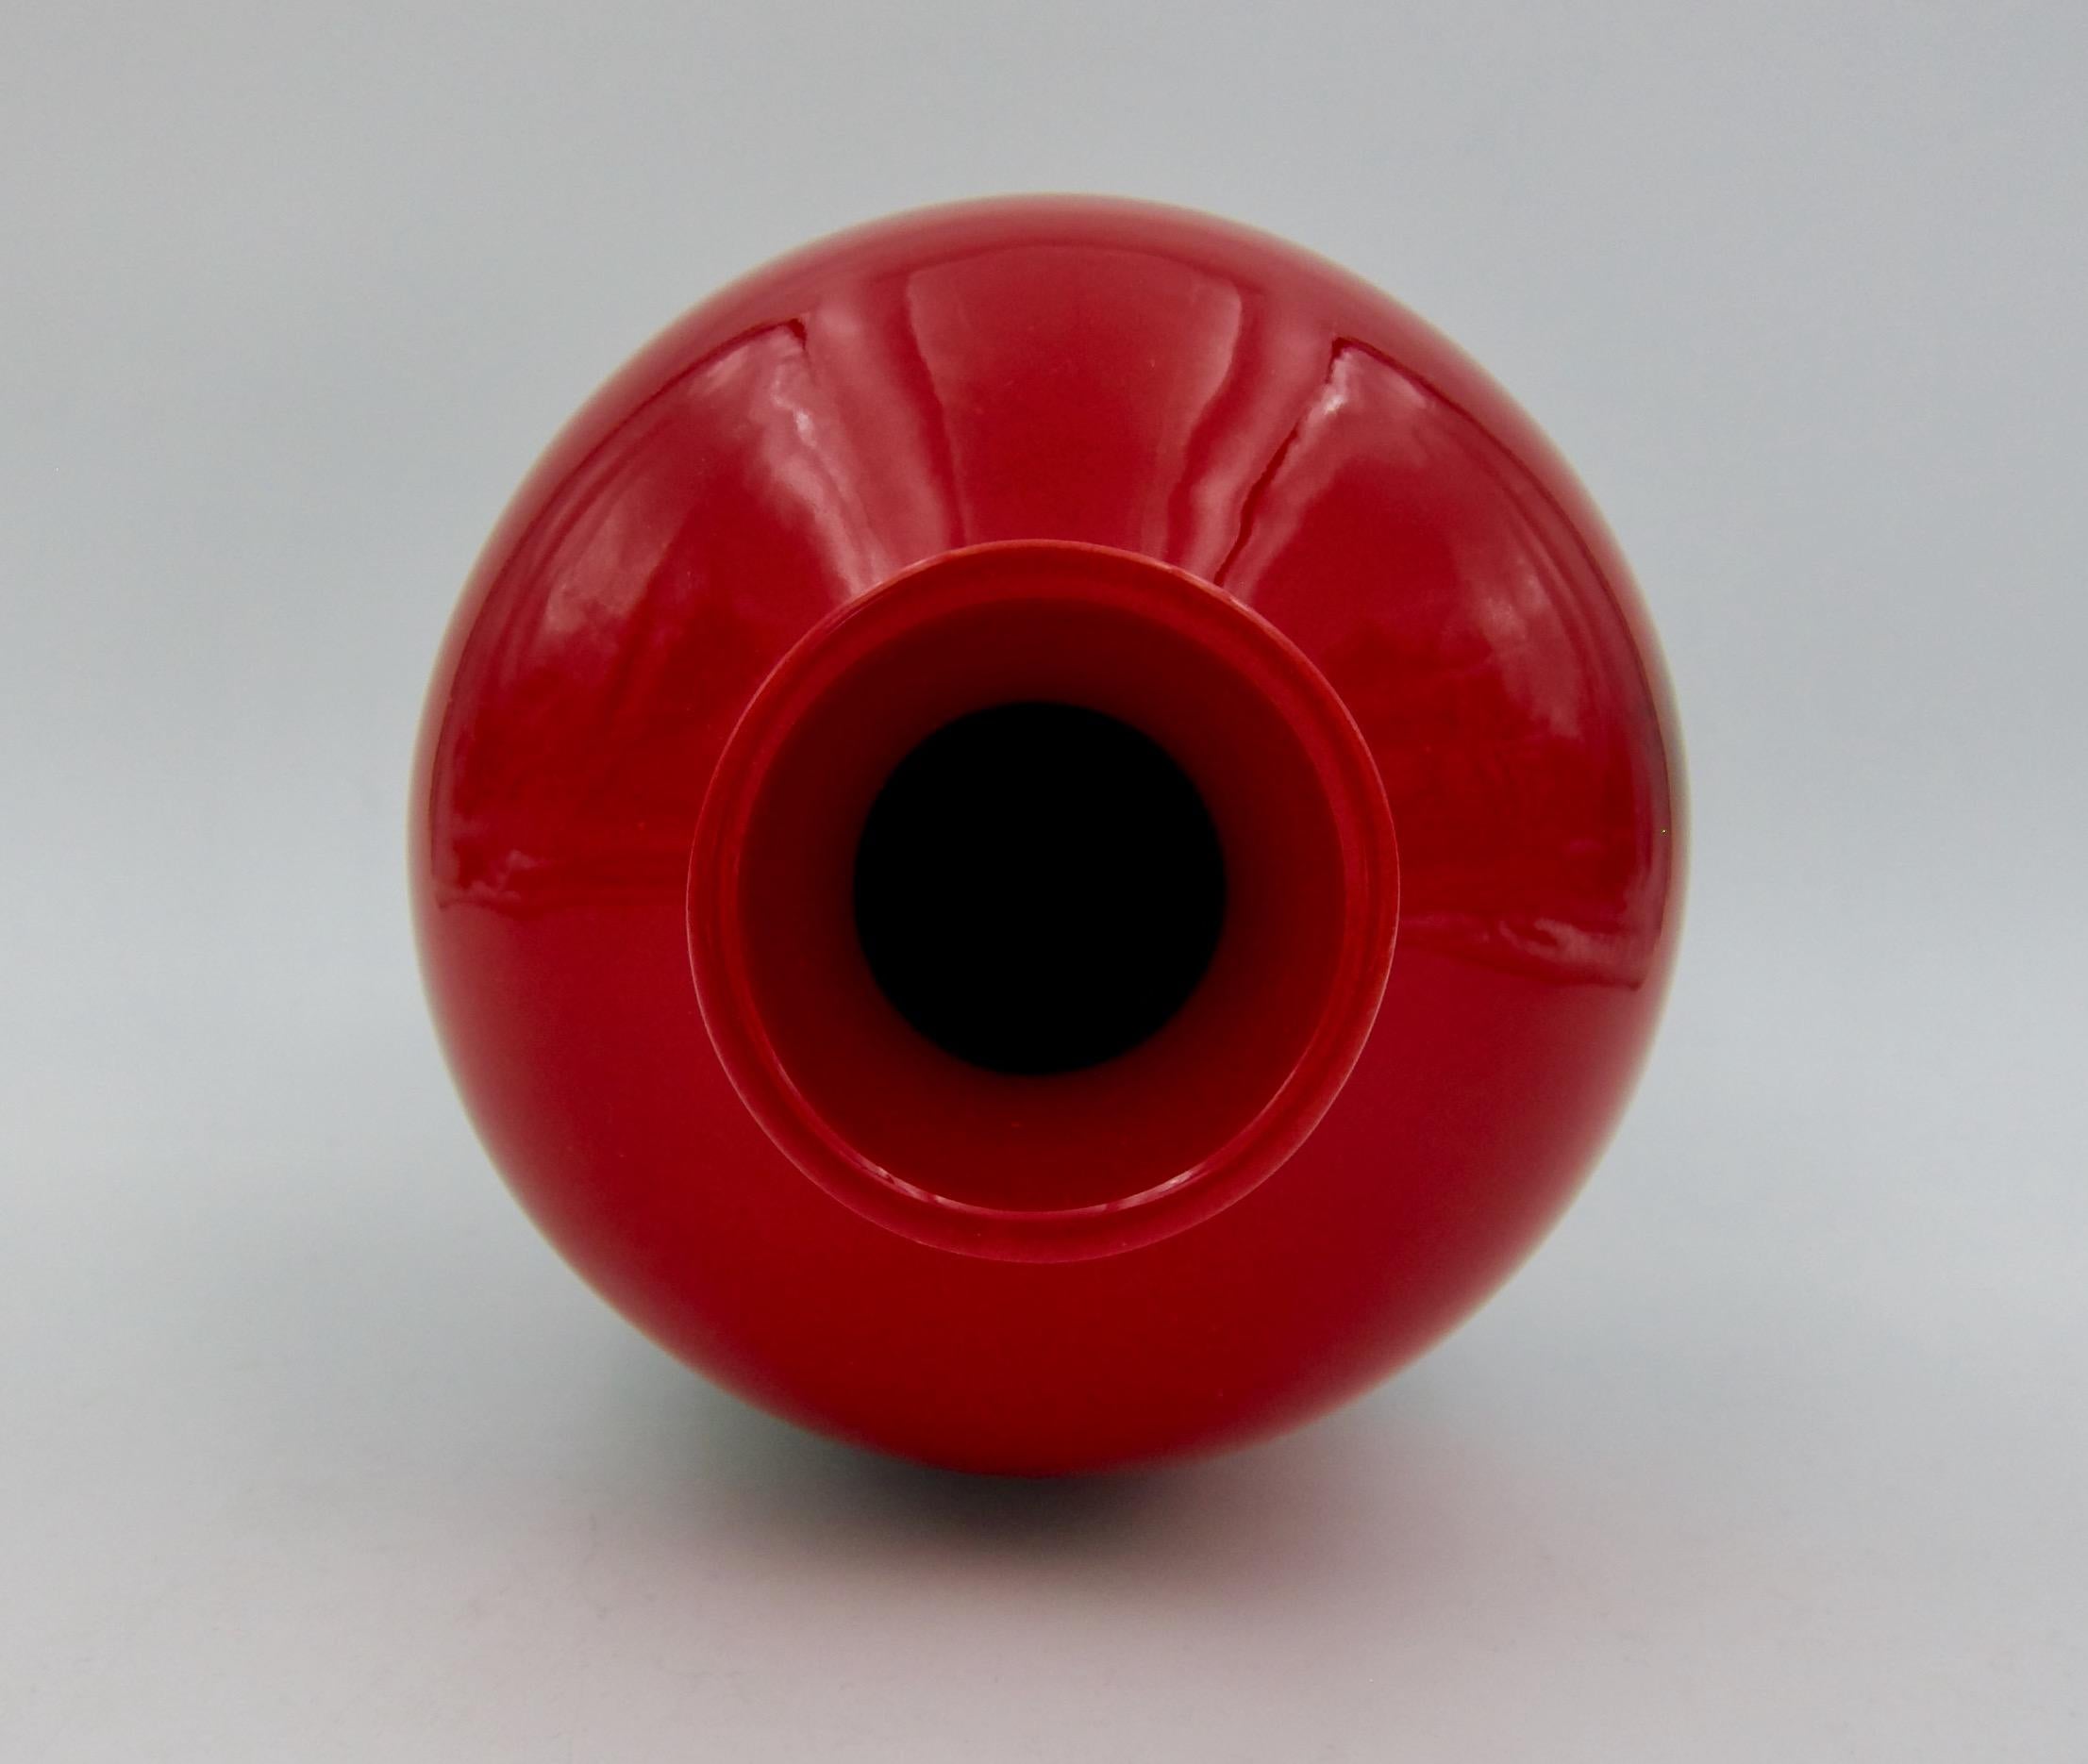 Glazed Large Royal Doulton Red Flambe Vase from the Art Deco Period